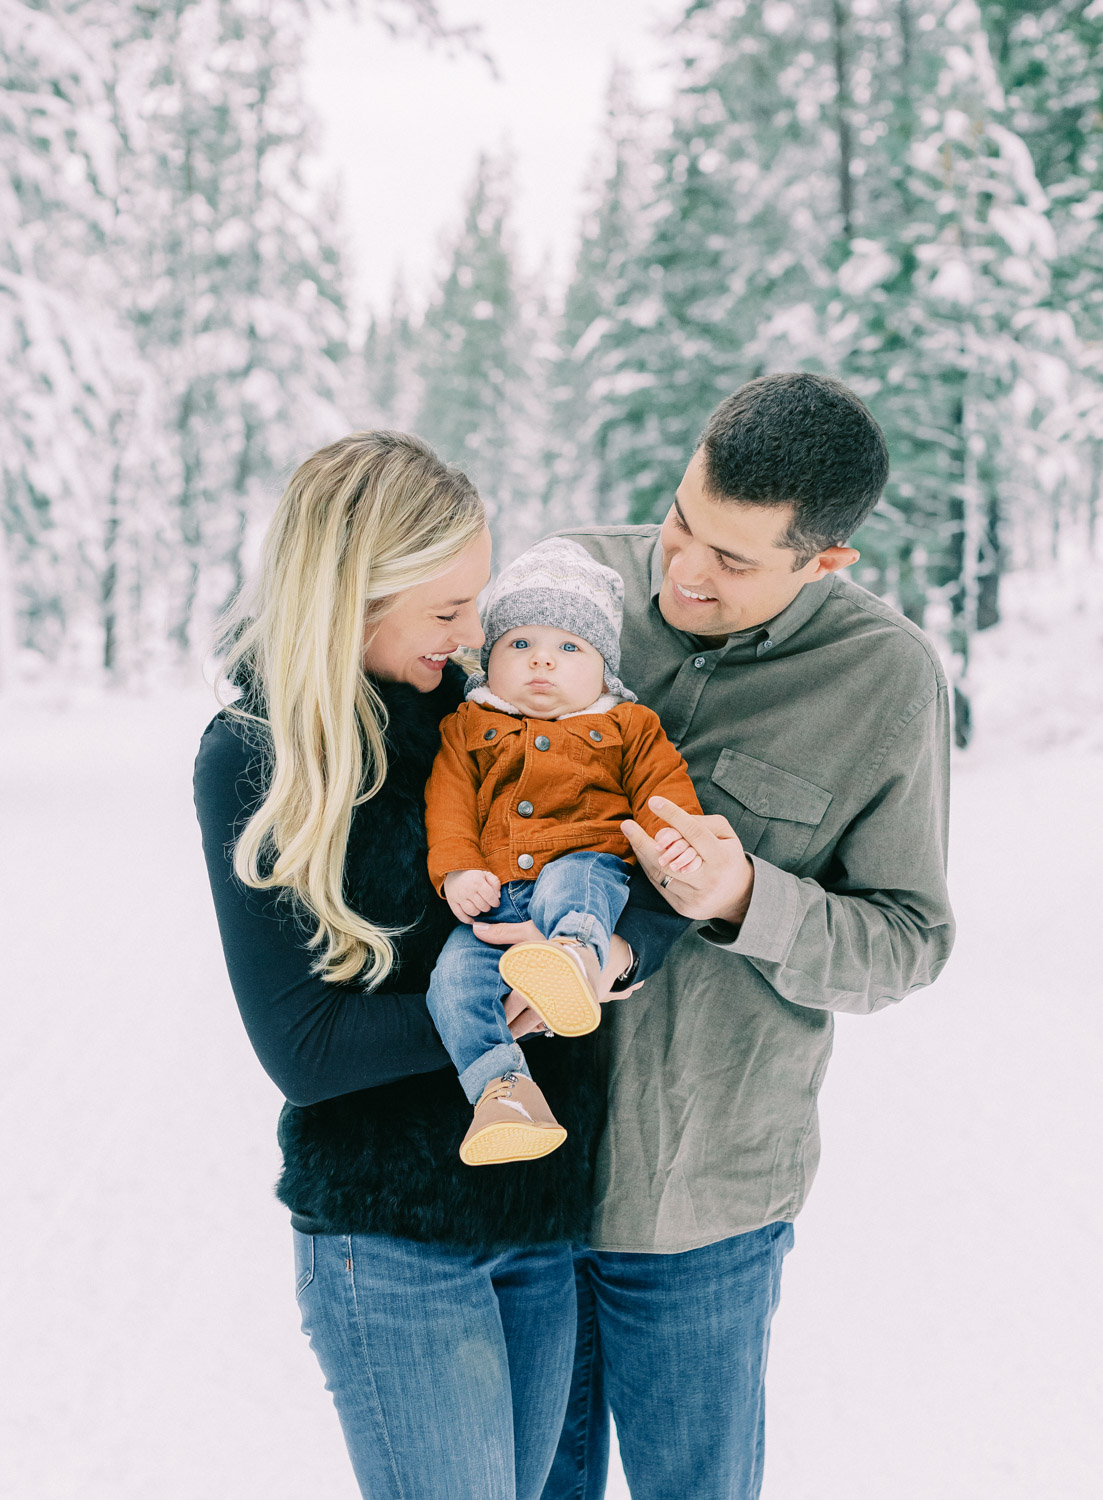 Lake Tahoe Winter Family Photography Session